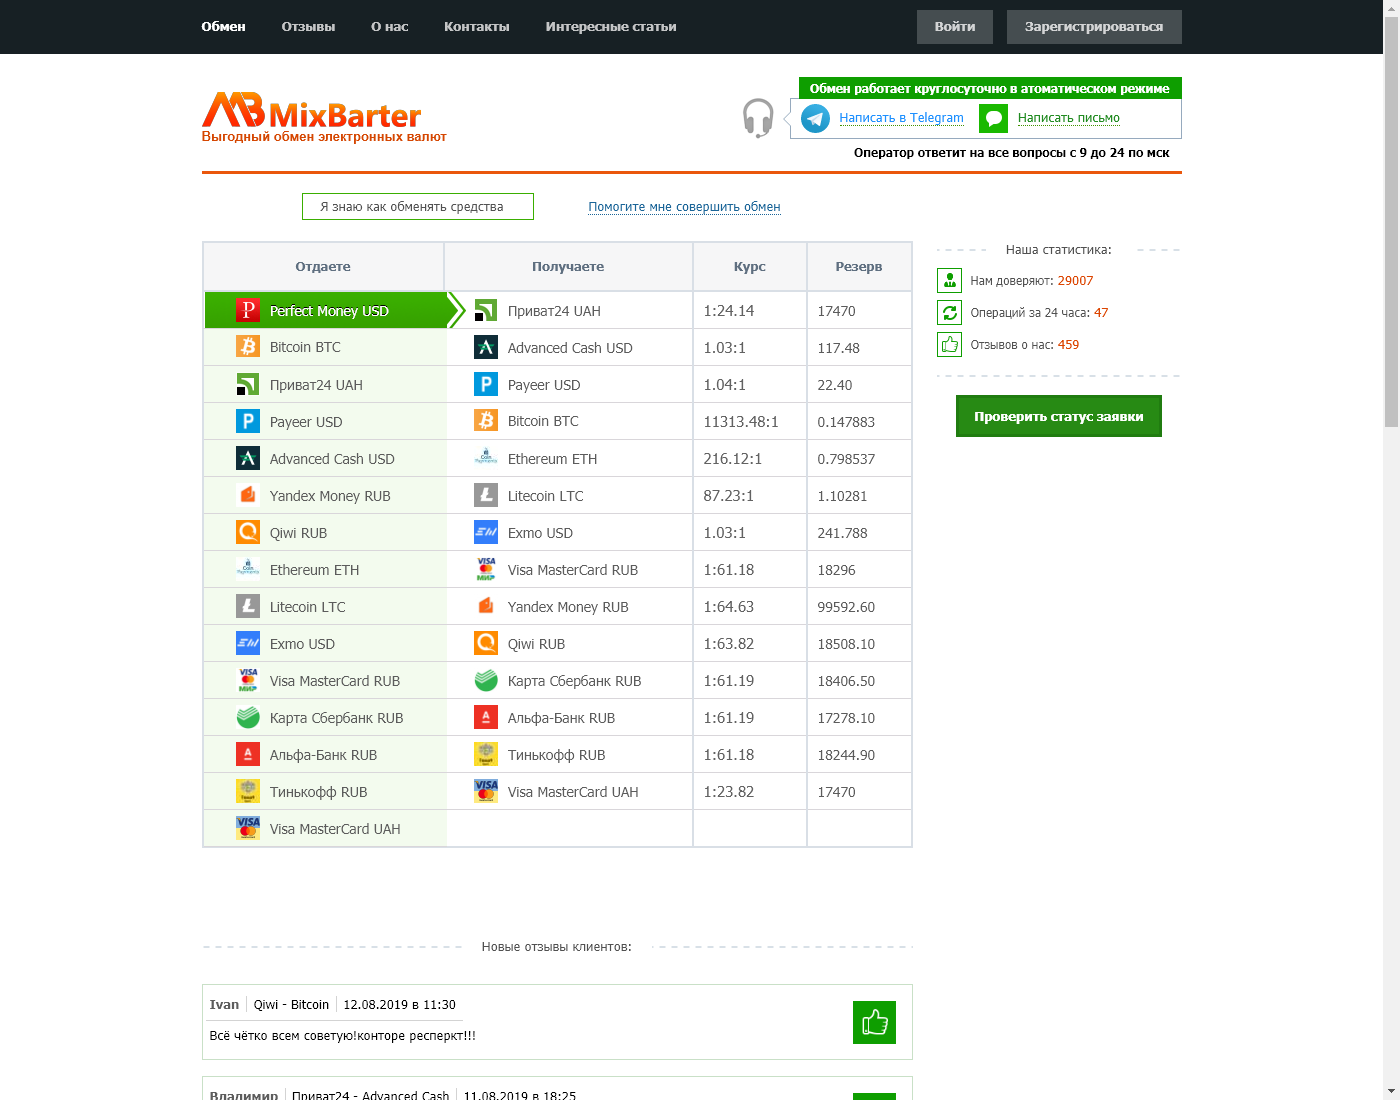 MixBarter user interface: the home page in English